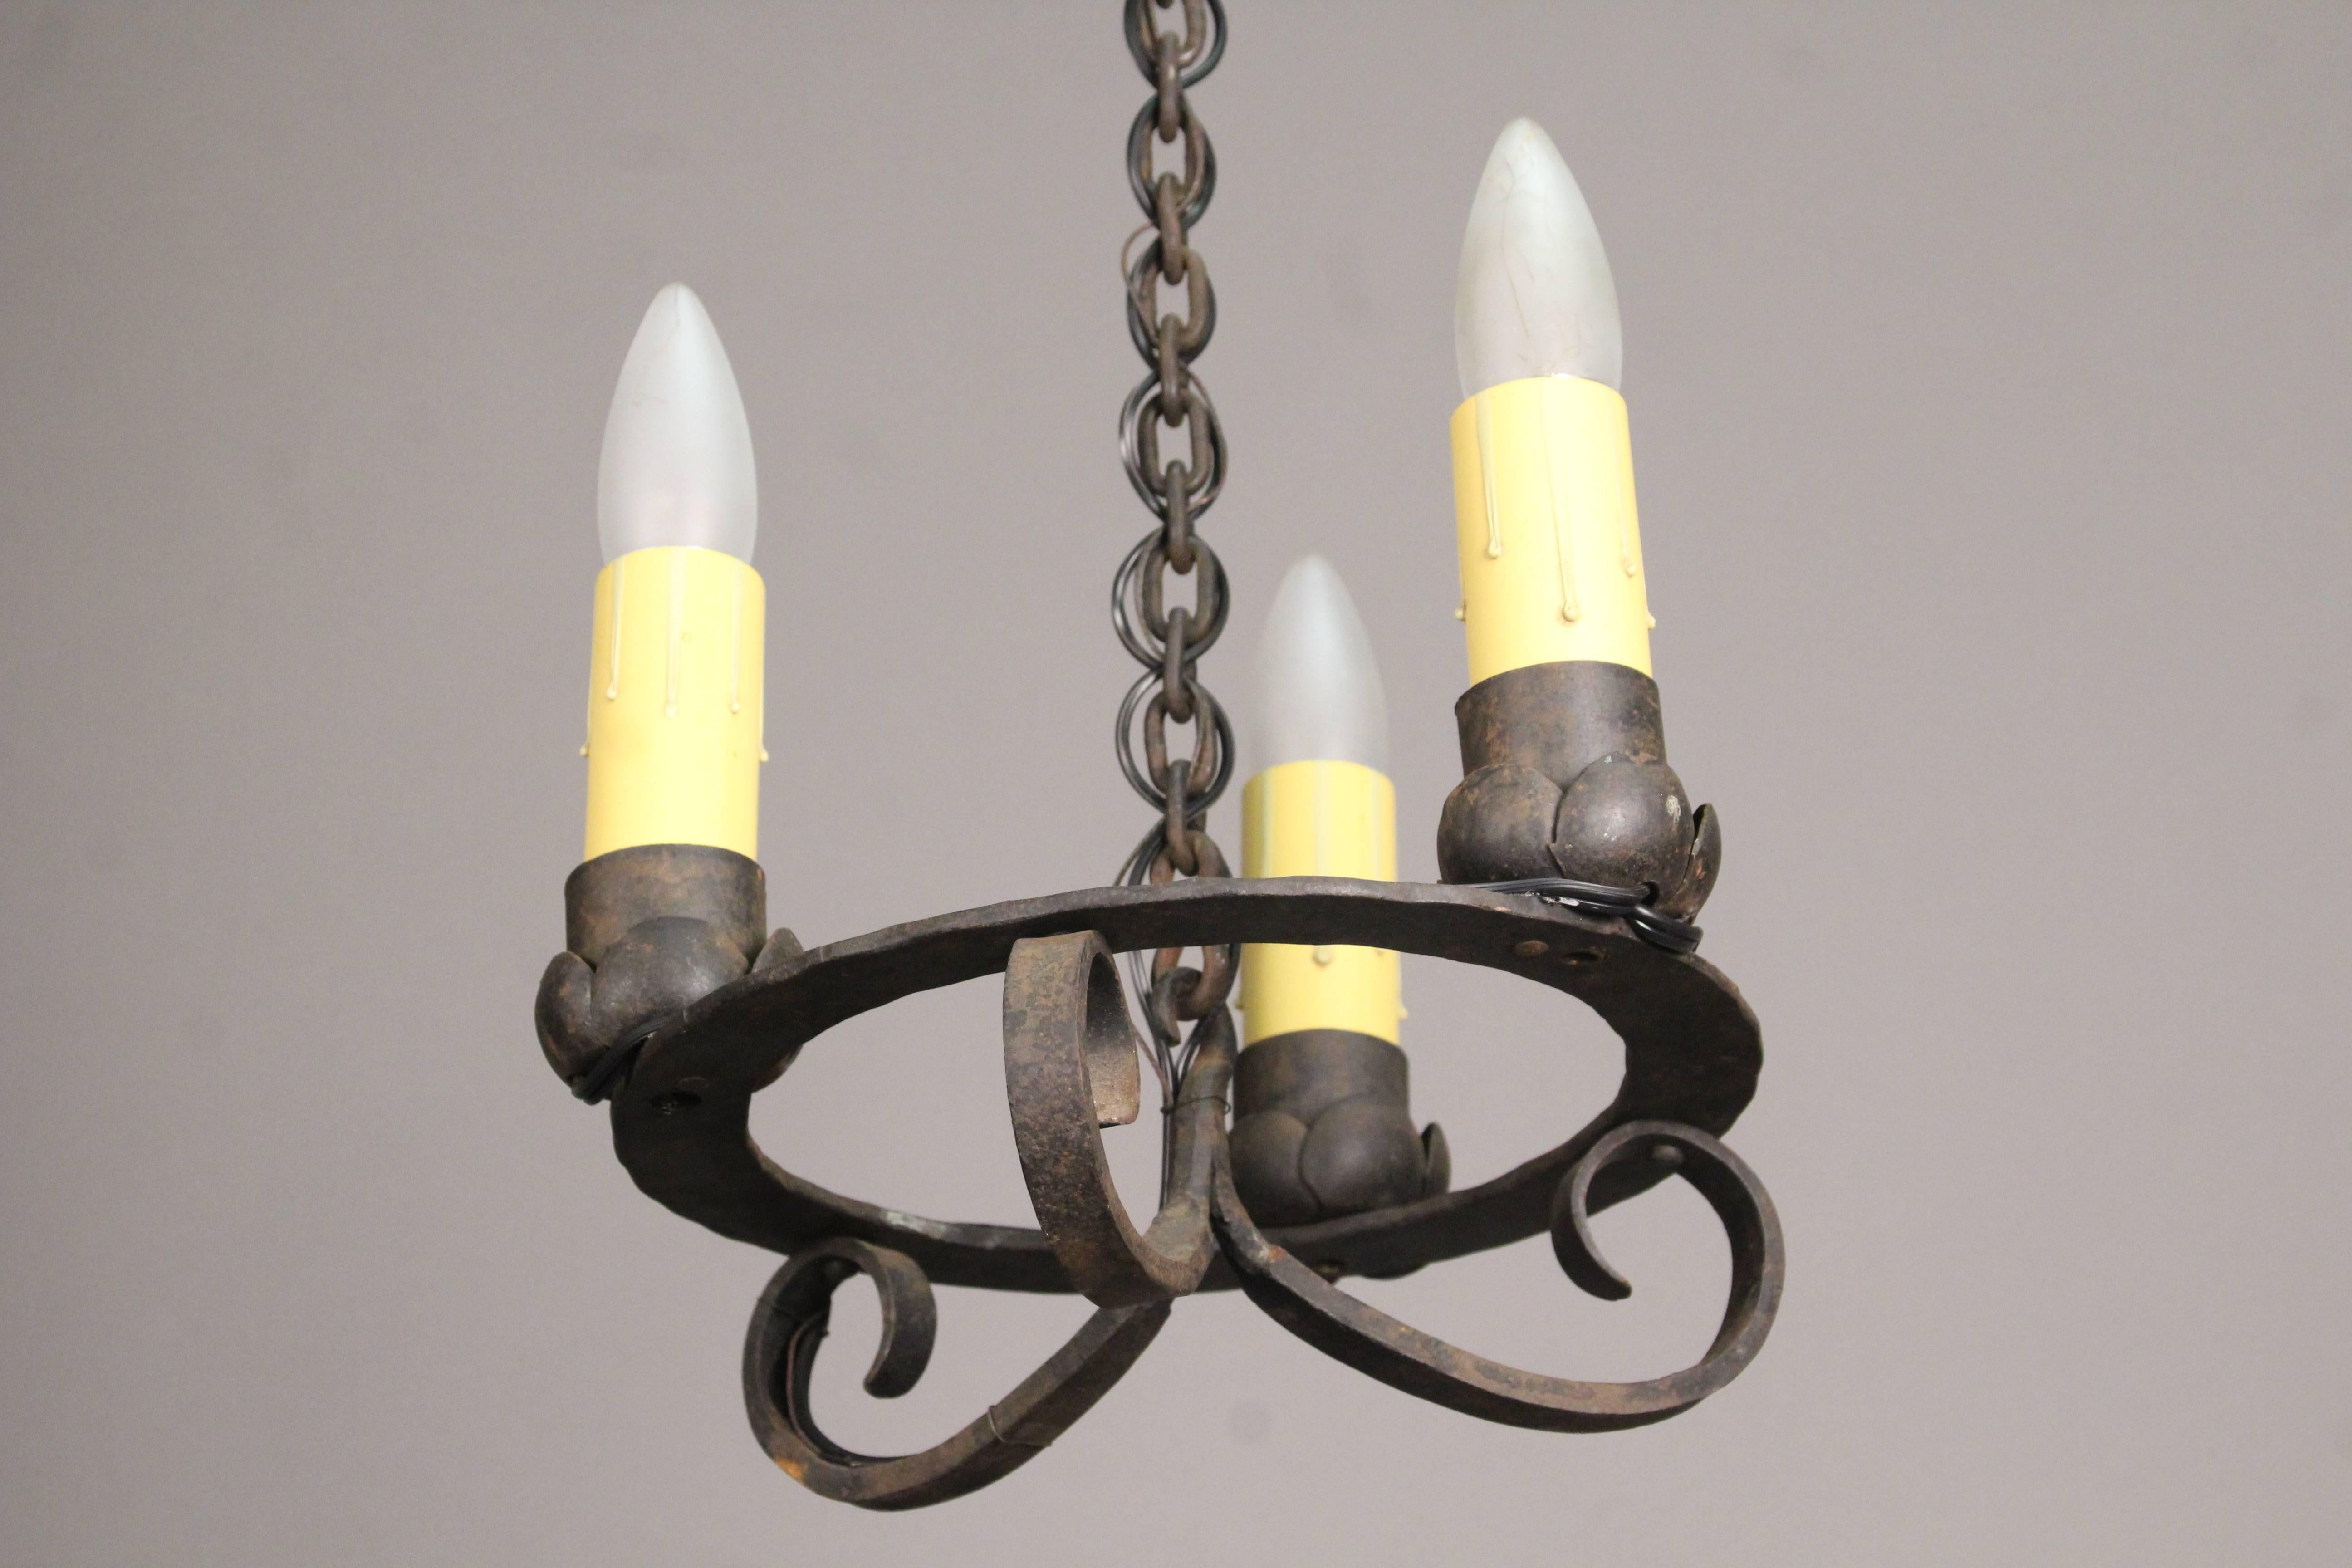 1920s Spanish Revival wrought iron chandelier. Measure: 12.5